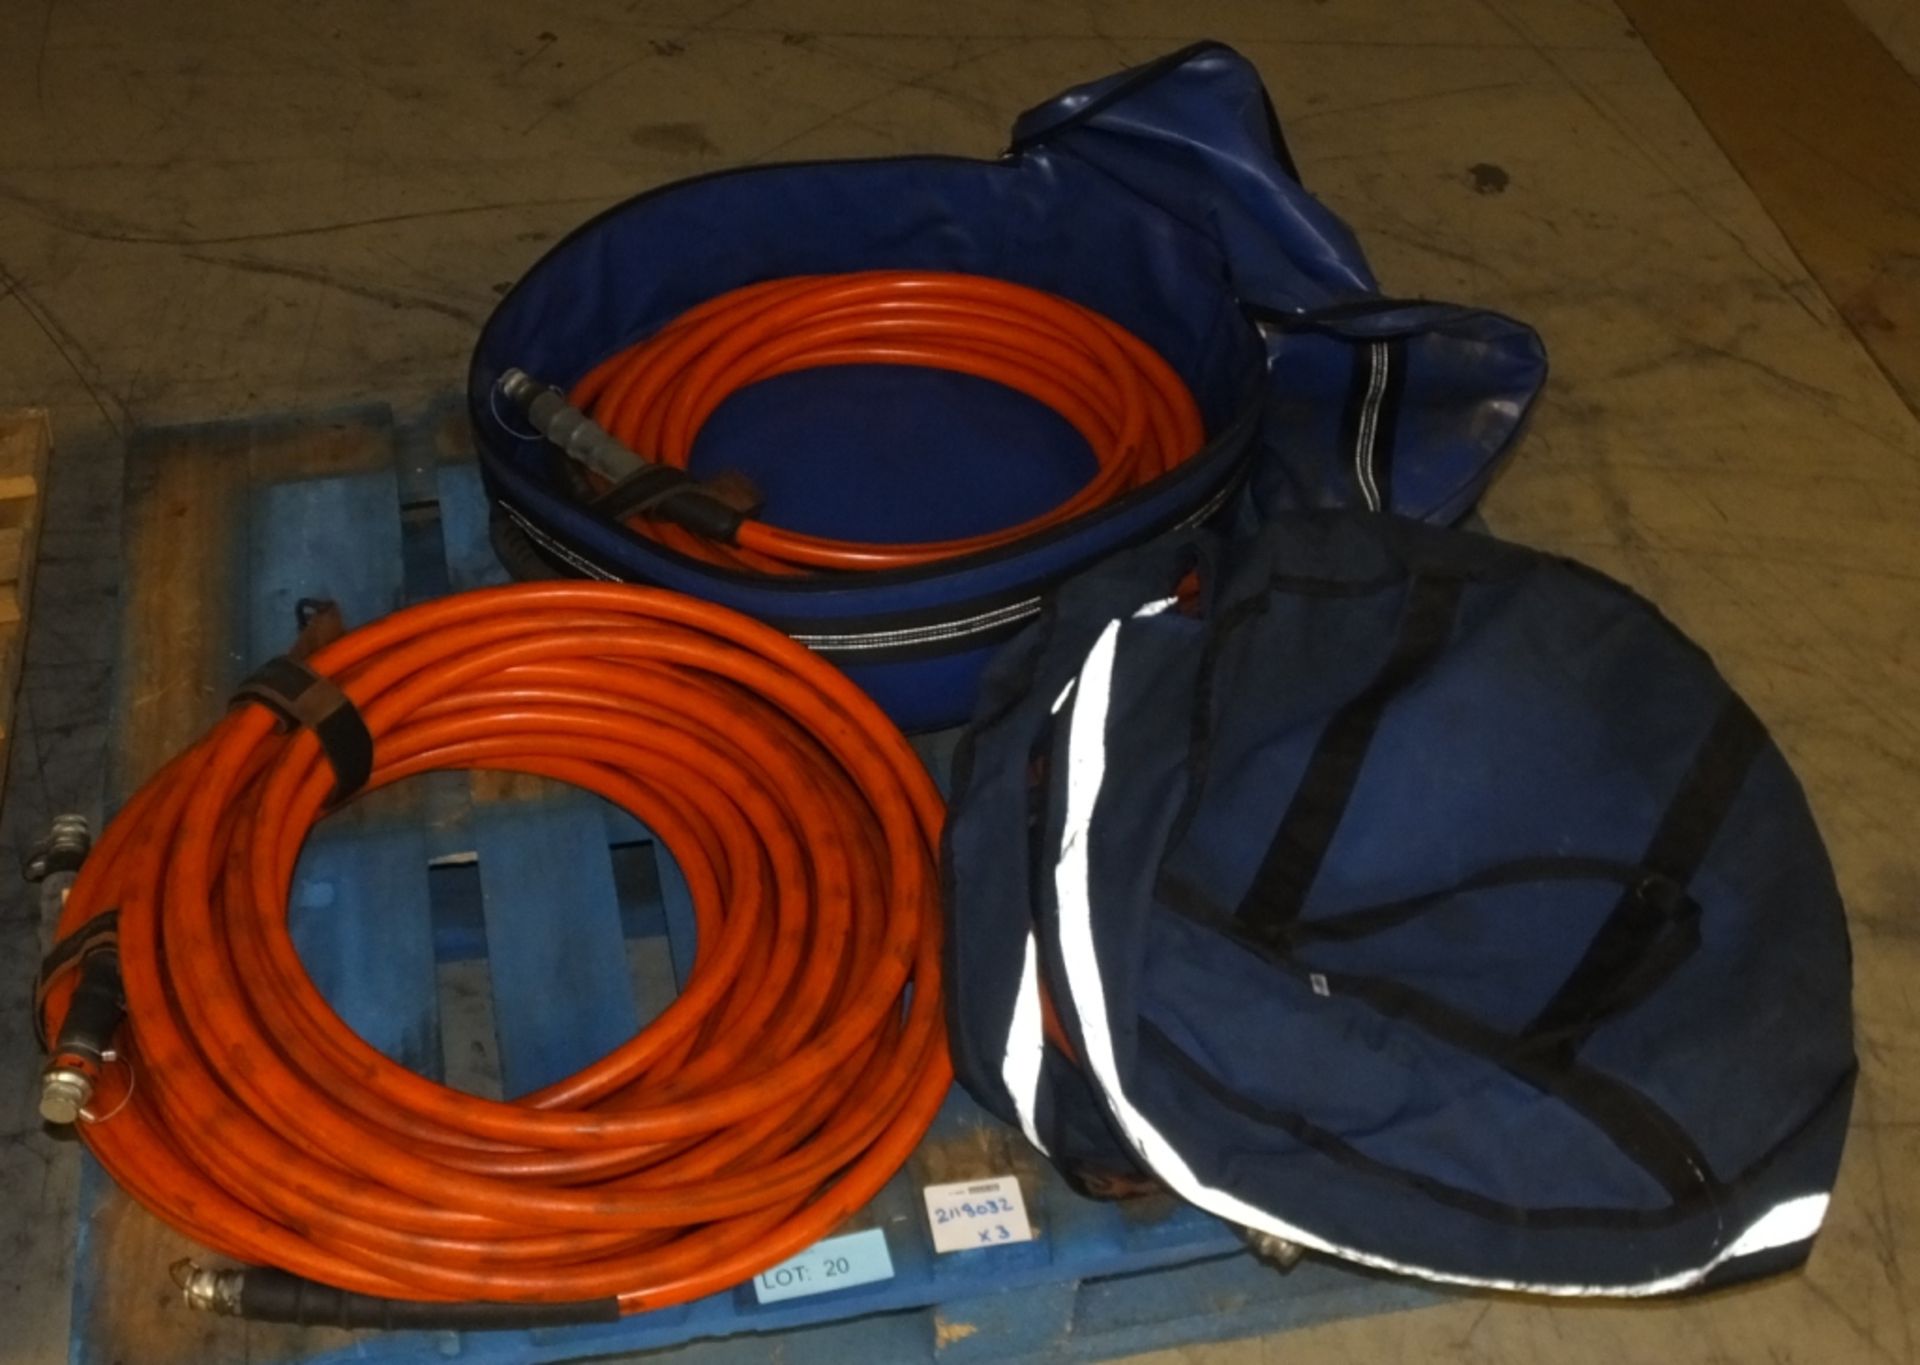 3x Holmatro Hydraulic Hoses in carry bags - Image 2 of 4